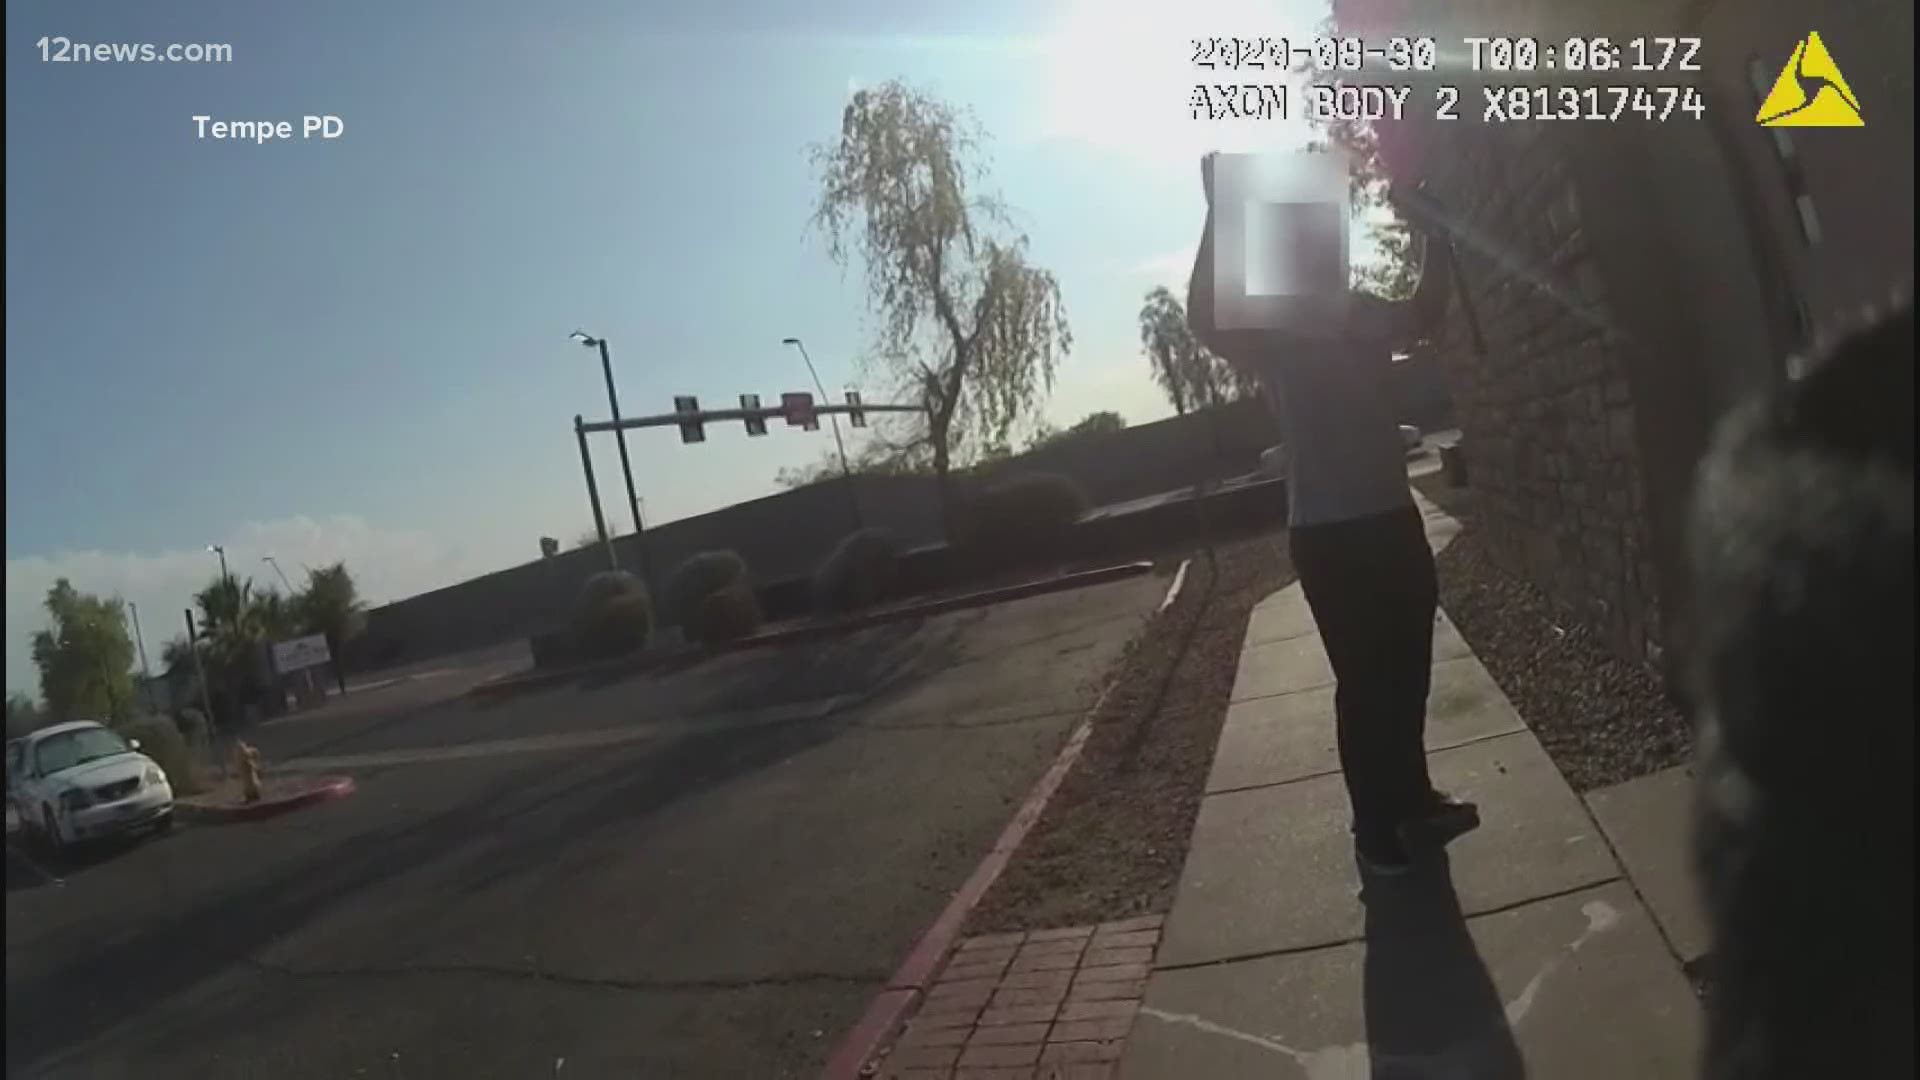 A Tempe police officer is under investigation after he held a Black hotel employee at gunpoint while he was supposed to look for a white suspect.